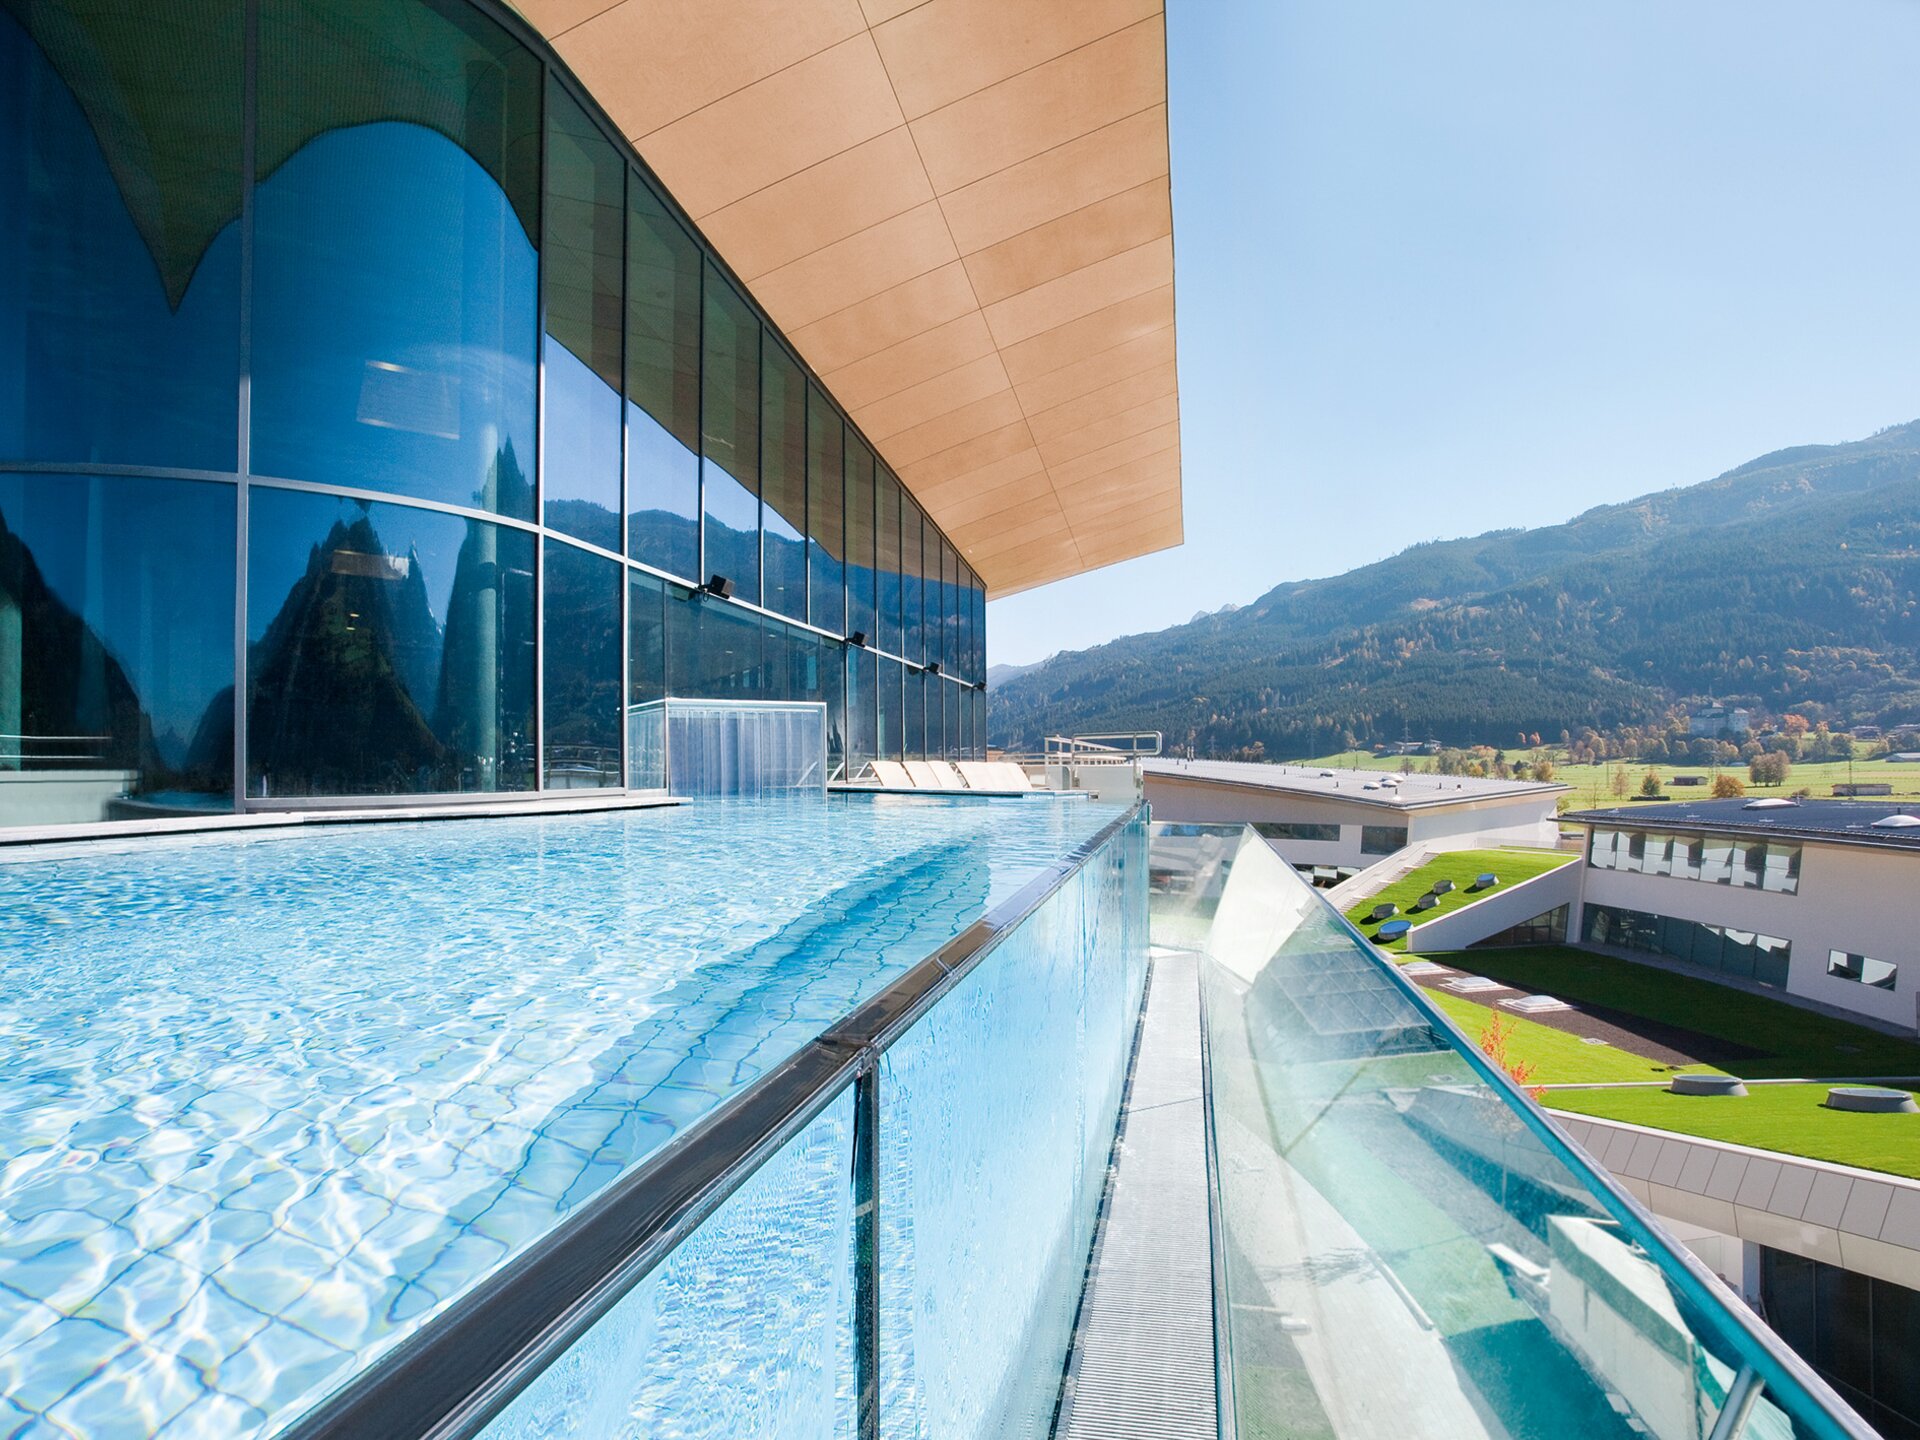 Therme mit Infinity Pool Österreich